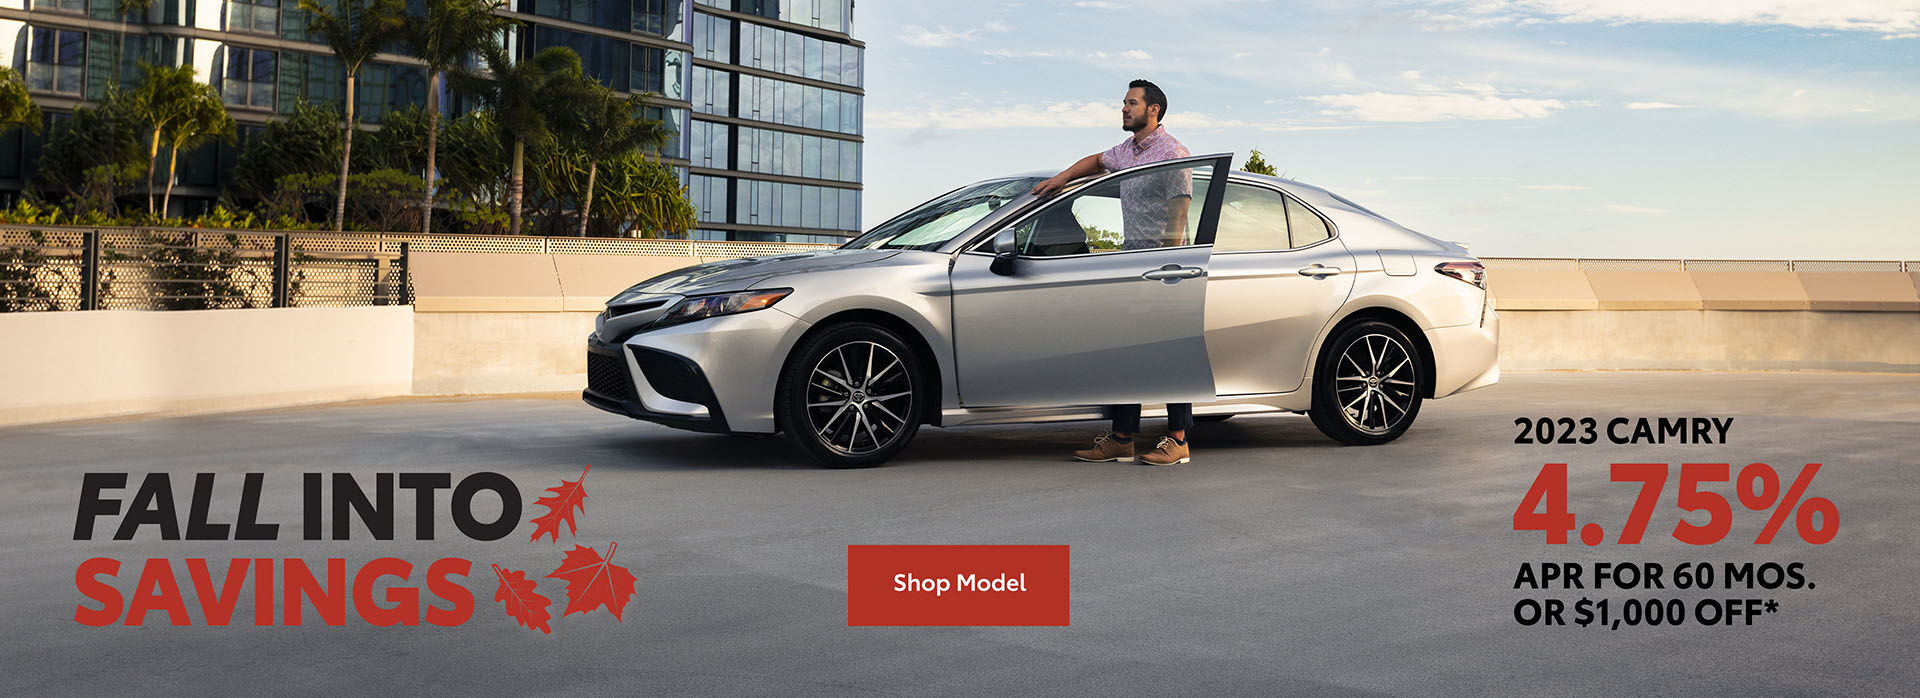 Fall Into Savings - 2023 Camry 4.75% APR for 60 Months or $1,000 Off*